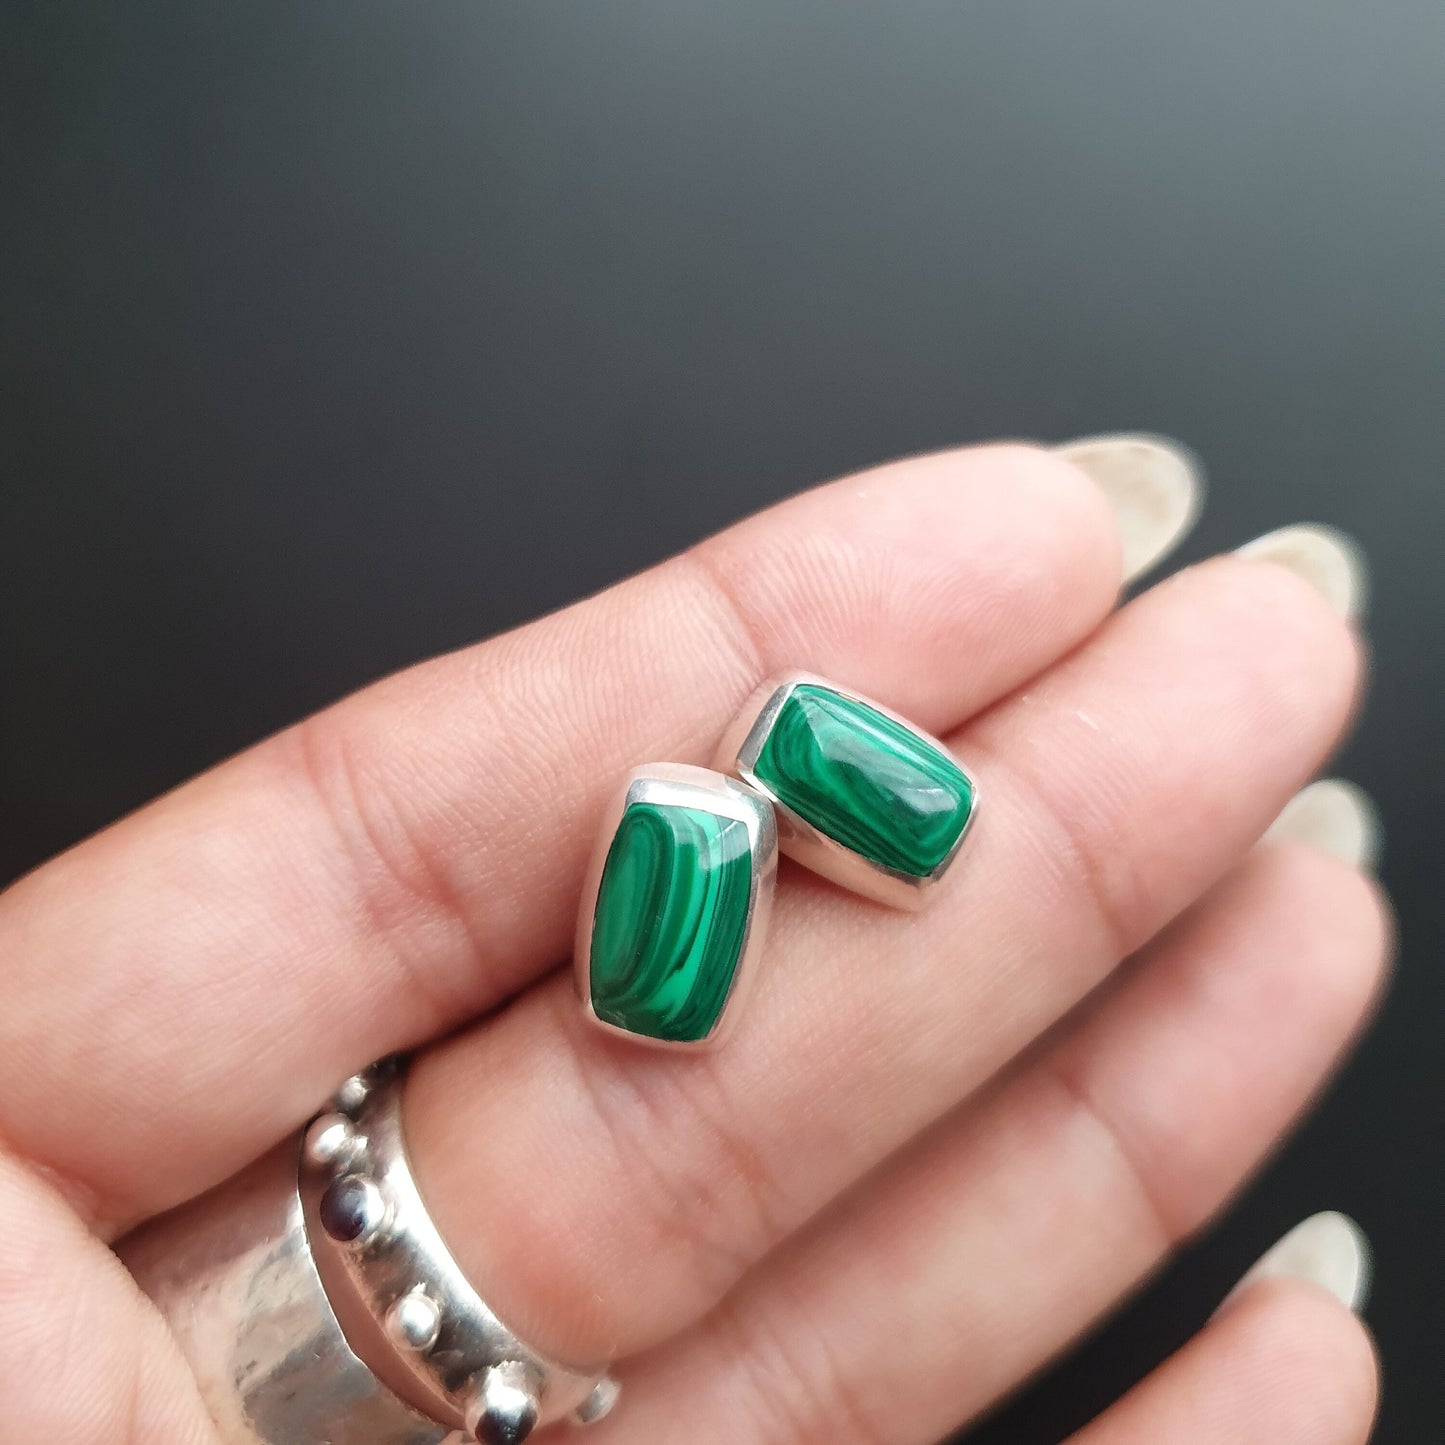 Studs, rectangular,earrings, malachite, gemstone, sterling silver, gifts, vintage, handmade, free shipping, classic, statement,925, emerald